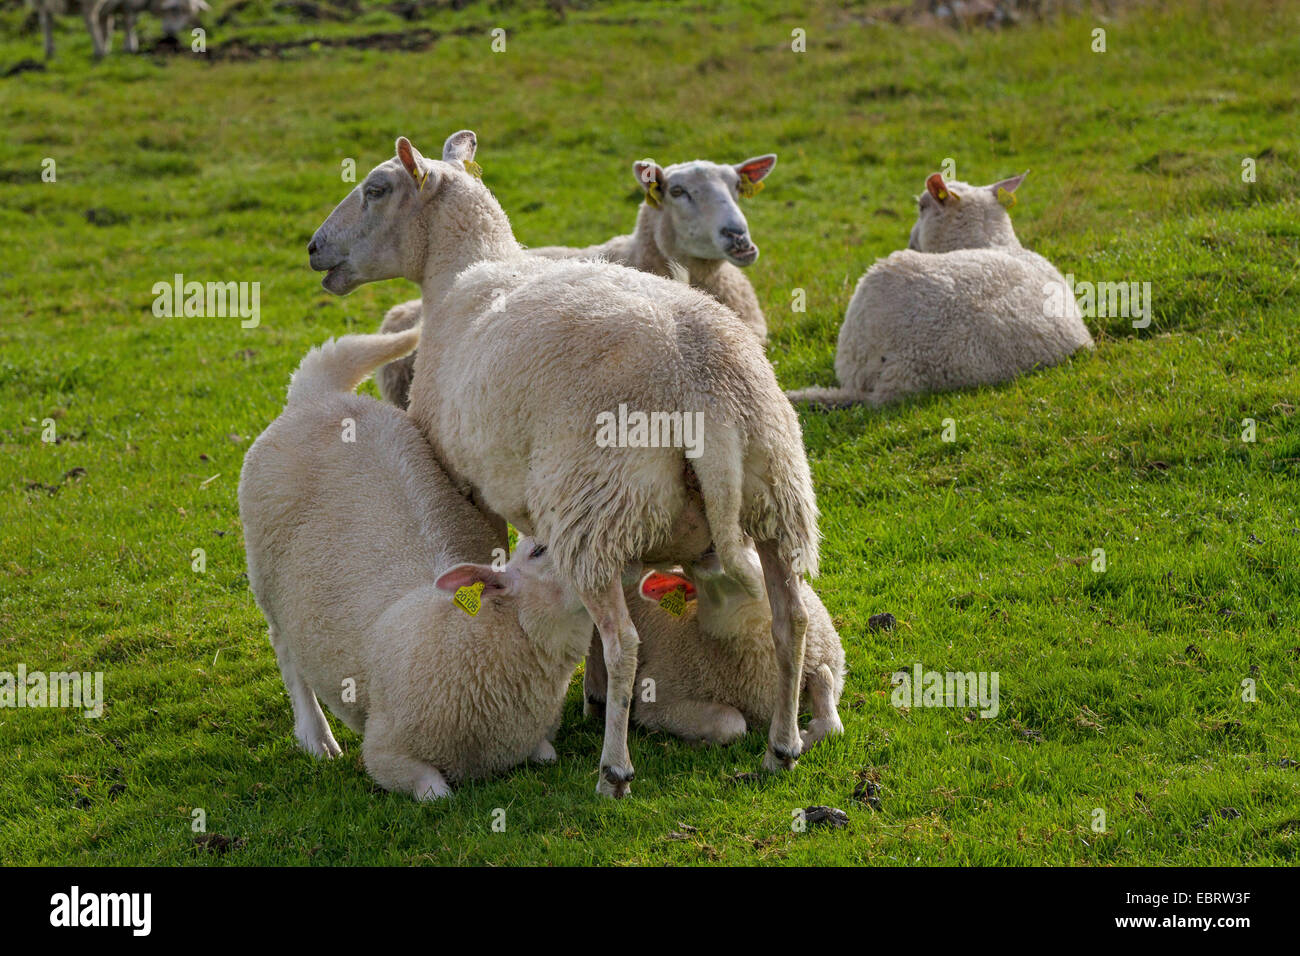 domestic sheep (Ovis ammon f. aries), two lambs drinking by their mother, Norway Stock Photo